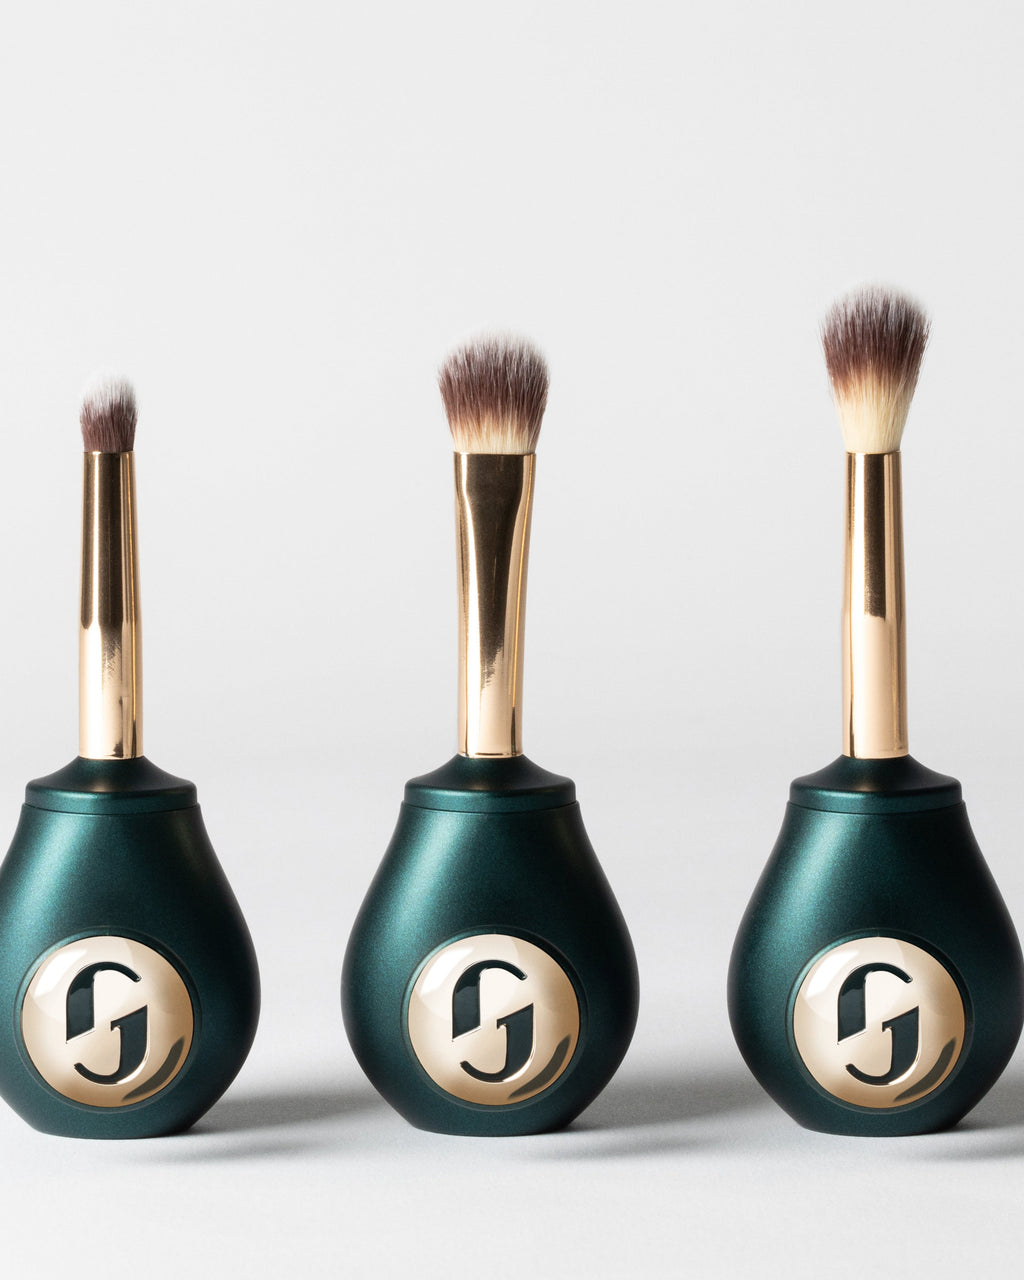 Introduction to Brushes  Makeup brushes guide, Eye makeup tips